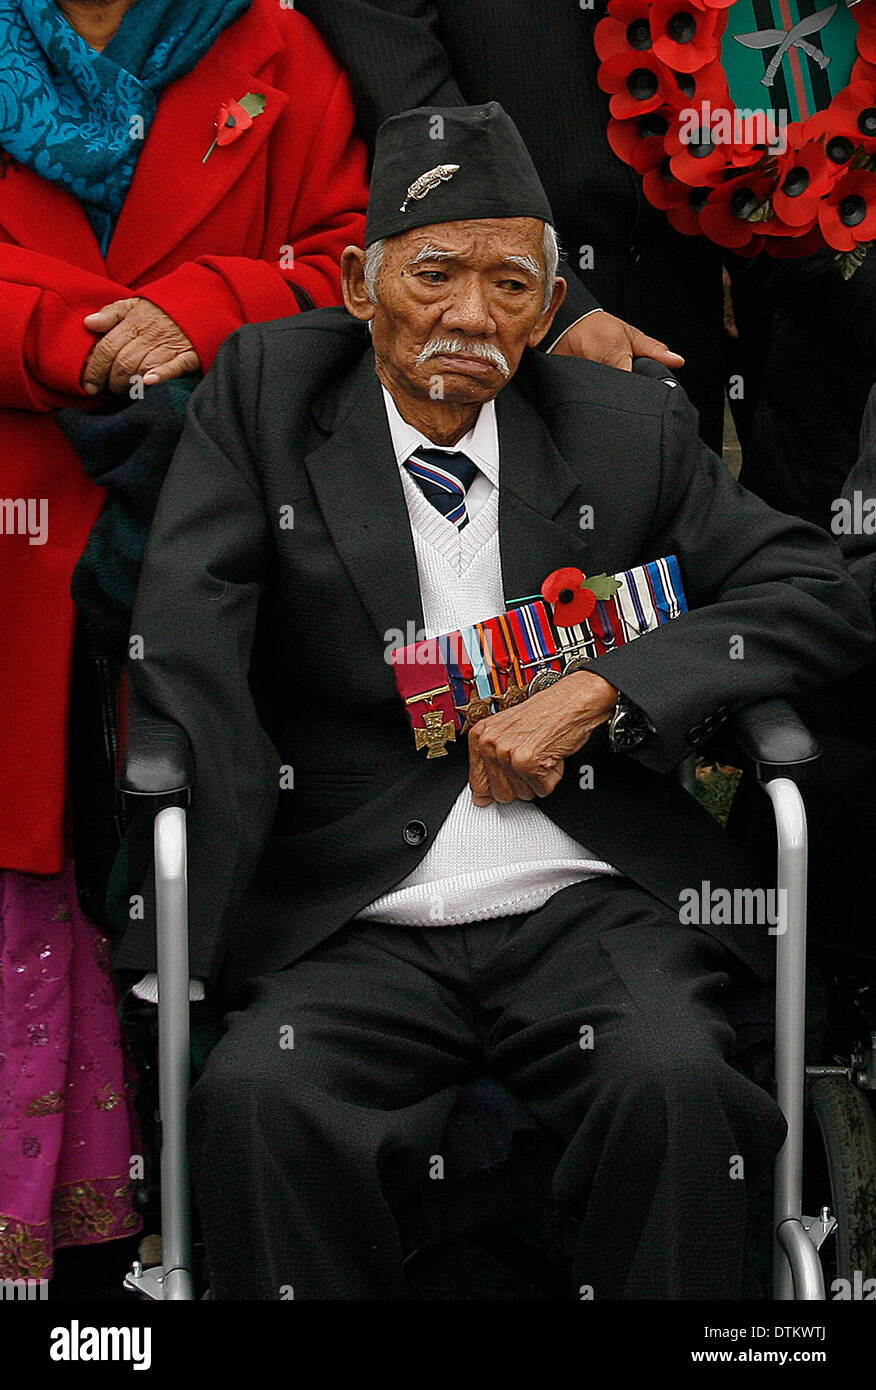 Lachhiman Gurung VC attending rally in Parliament Square with Joanna Lumley over Gurkha rights Stock Photo